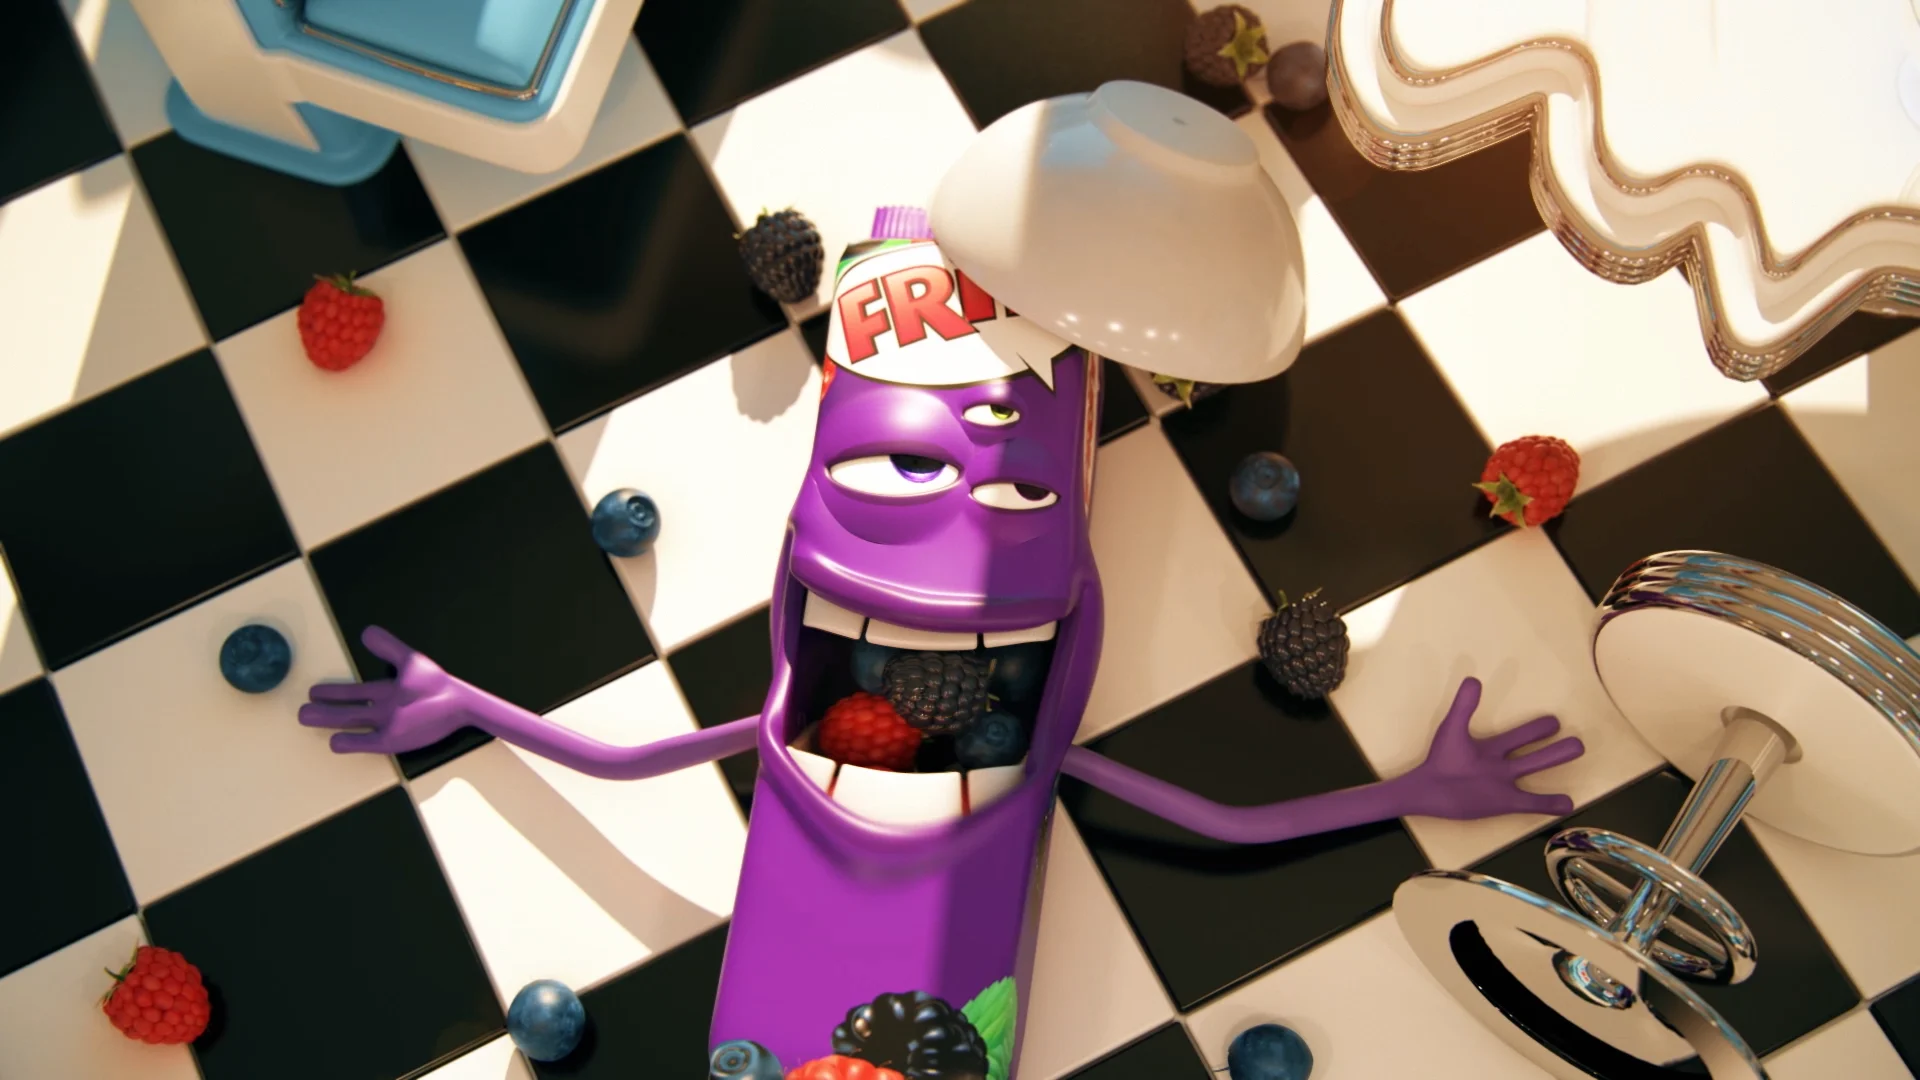 a lilac colores fritt-shaped packshot character is laying on the ground with a peel on his head and severeal fruits next to him. a fallen chair implements that he has just fallen down. 